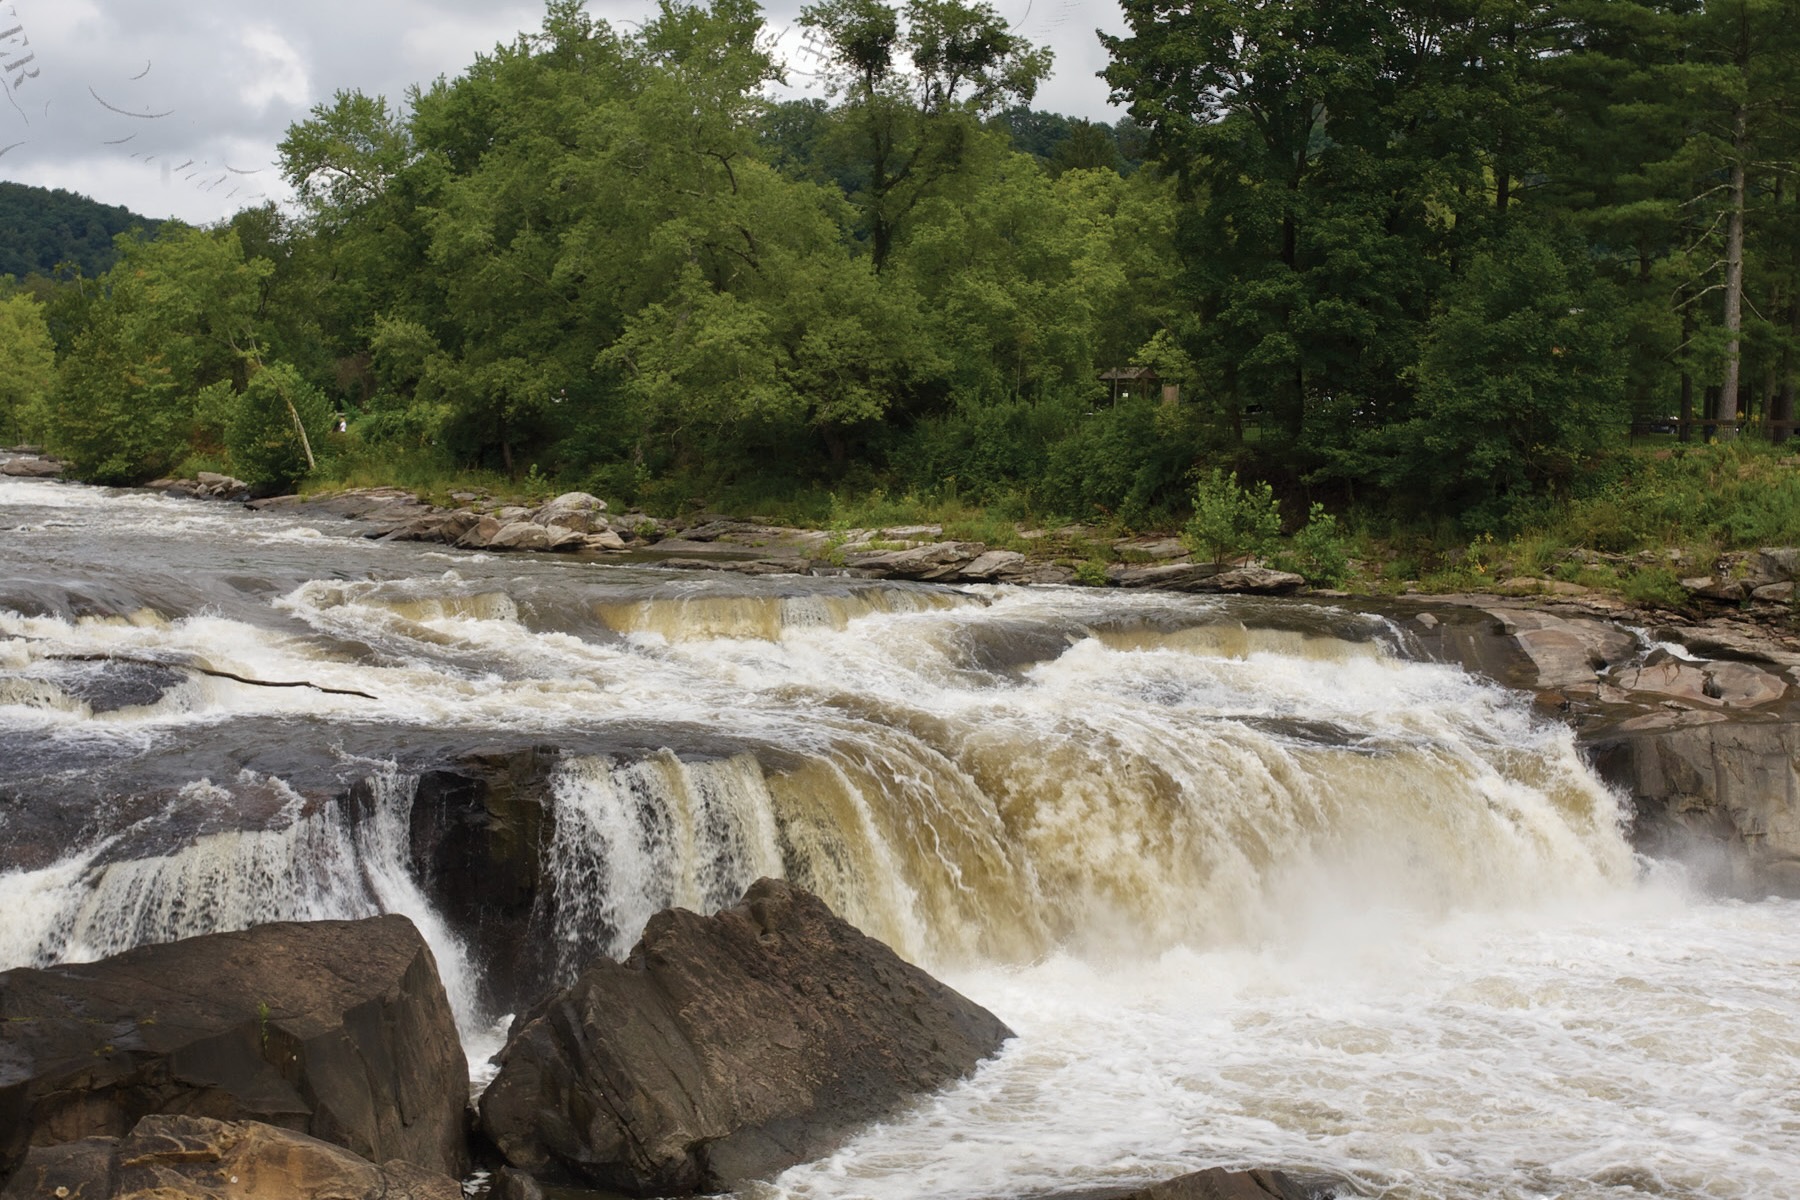 Waterfalls and rapids along the Youghiogheny River